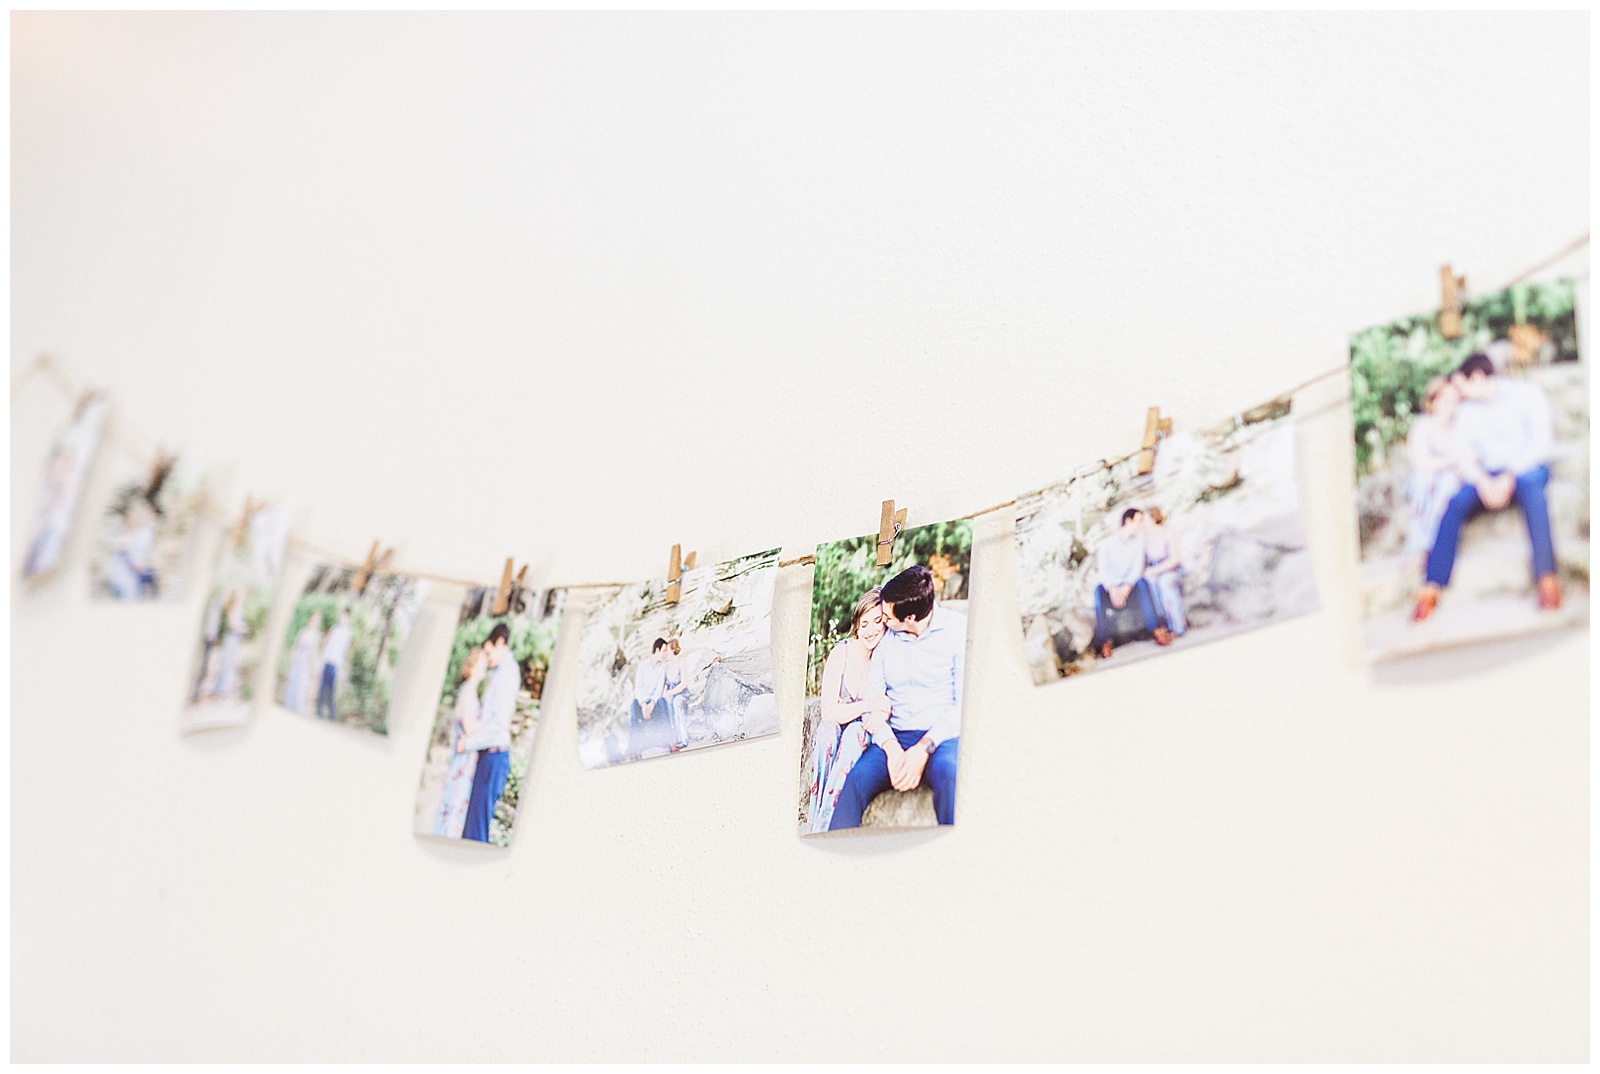 Indoor Wedding Decor idea of Engagement Photos hanging on twine from Outdoorsy Summer Wedding at North Carolina Lakehouse in the Mountains | check out the full wedding at KevynDixonPhoto.com